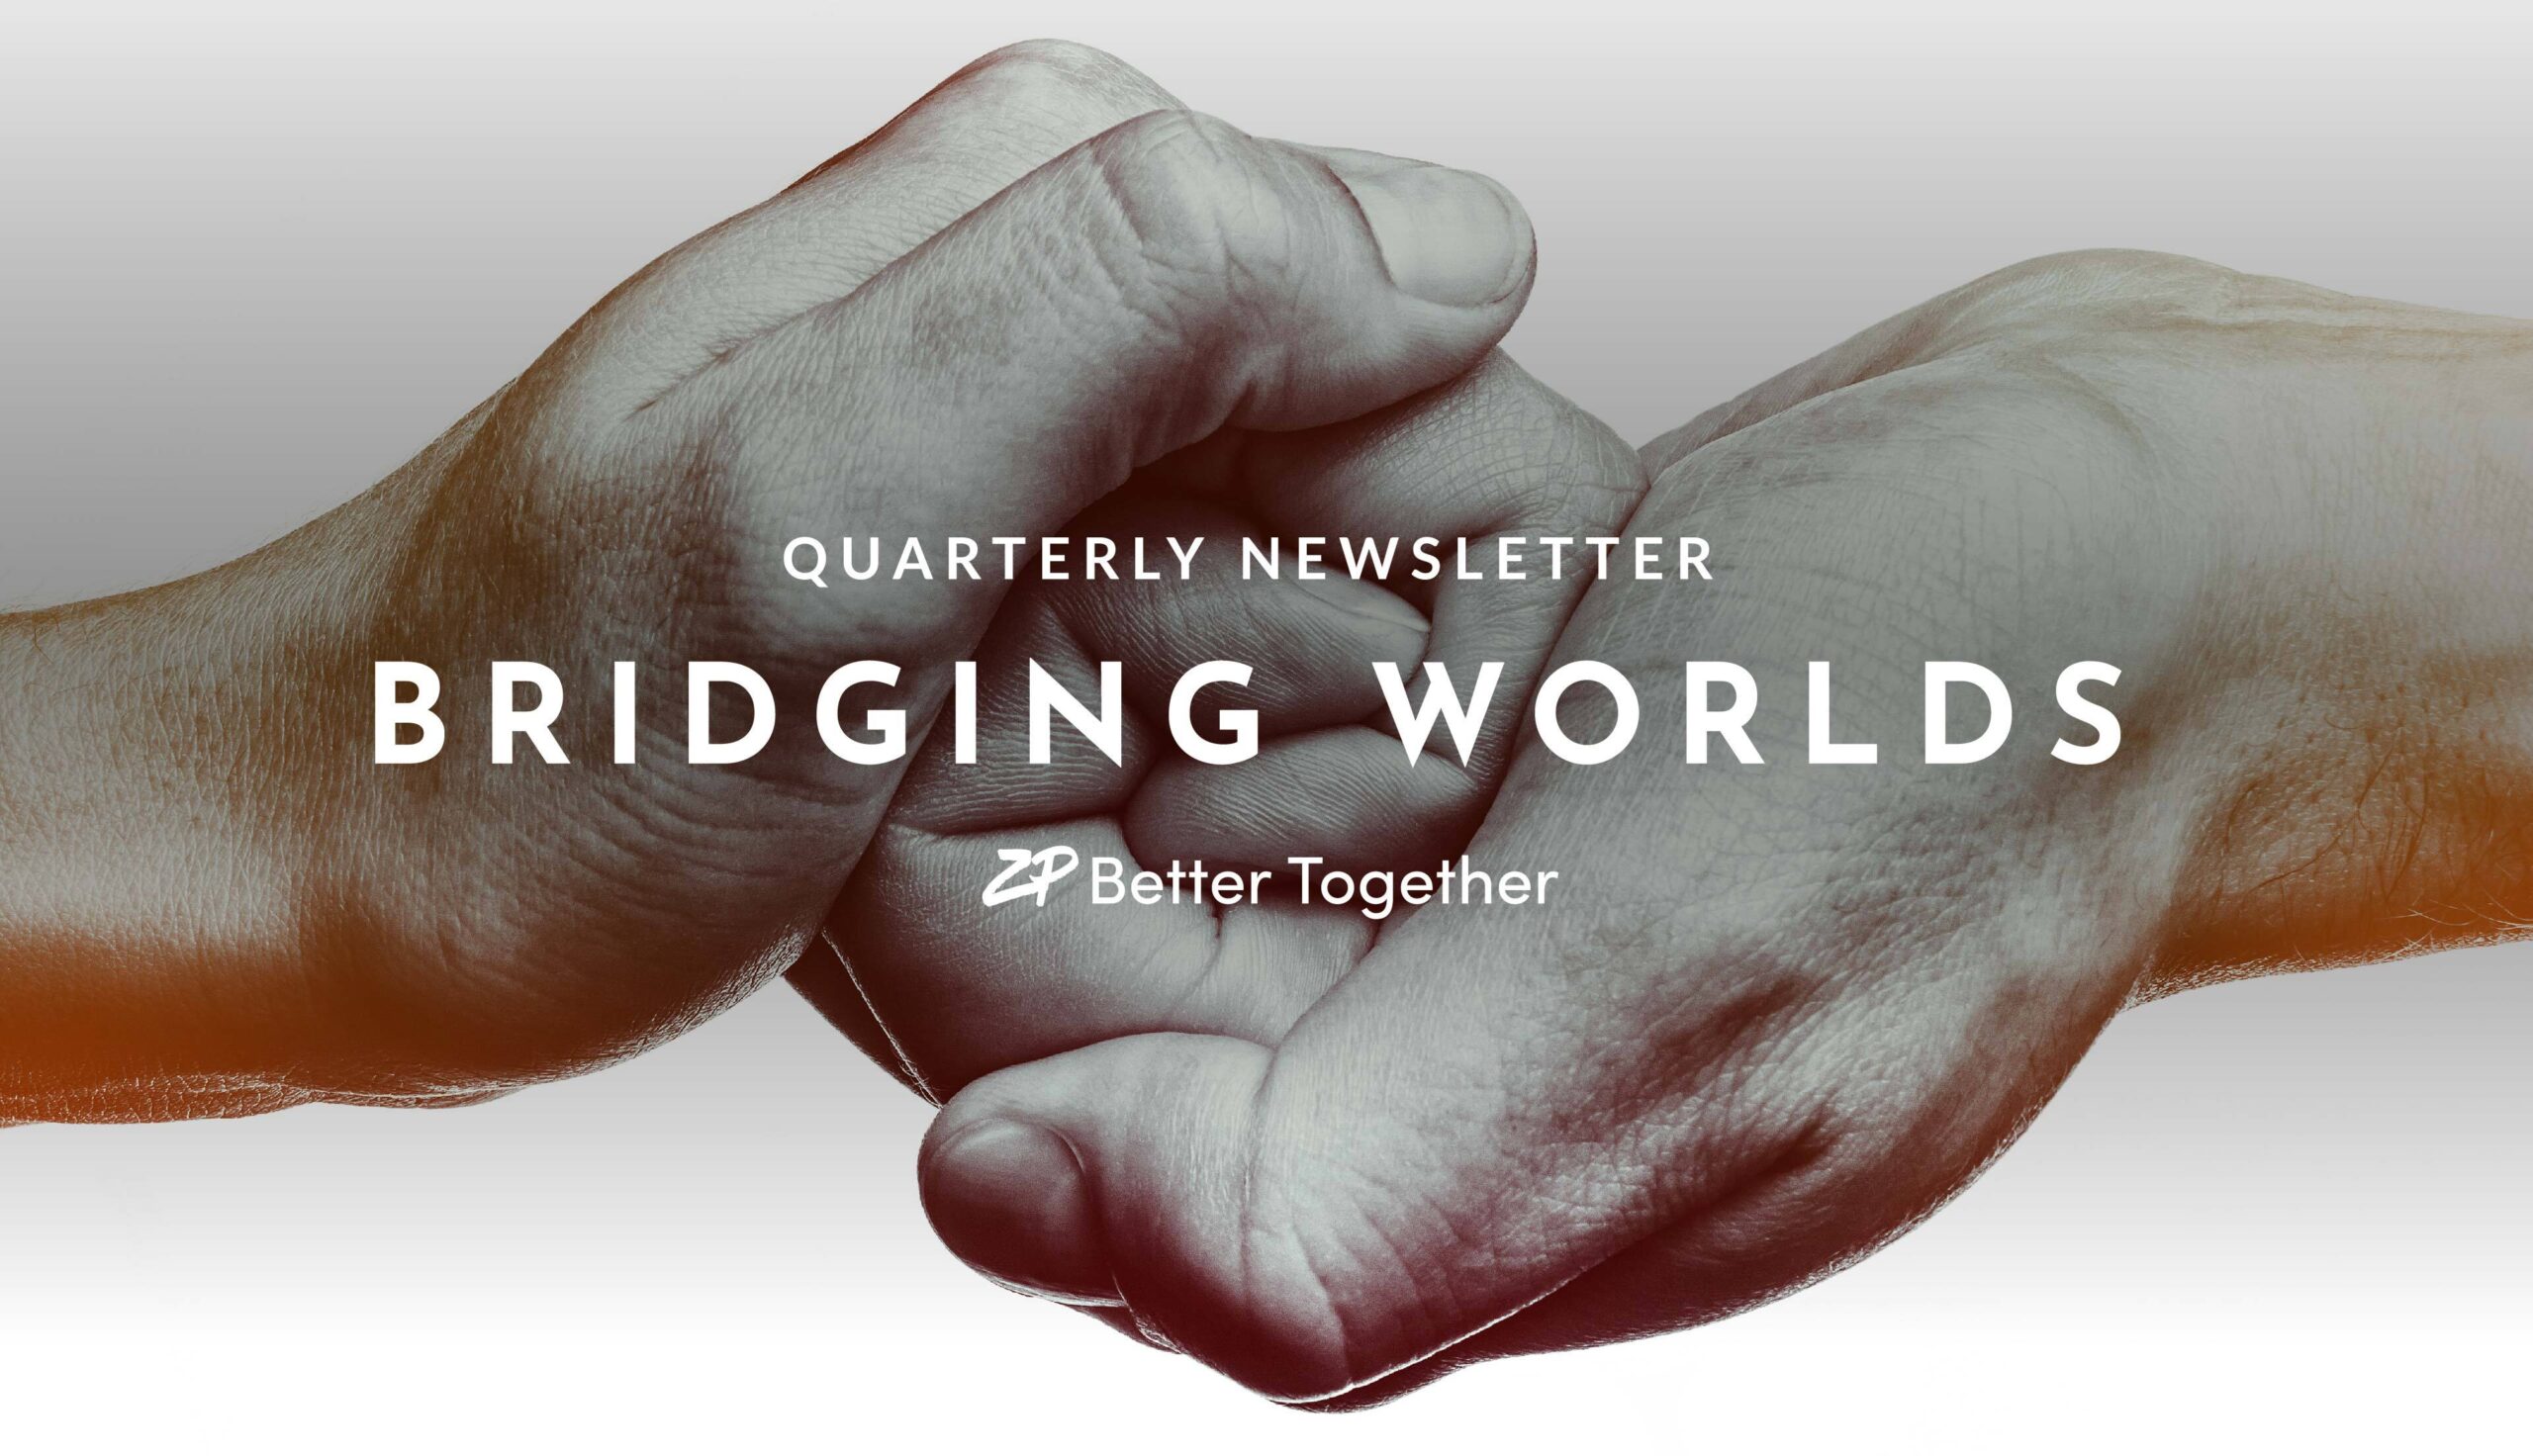 holding hands in background with text in front-"bridging worlds"